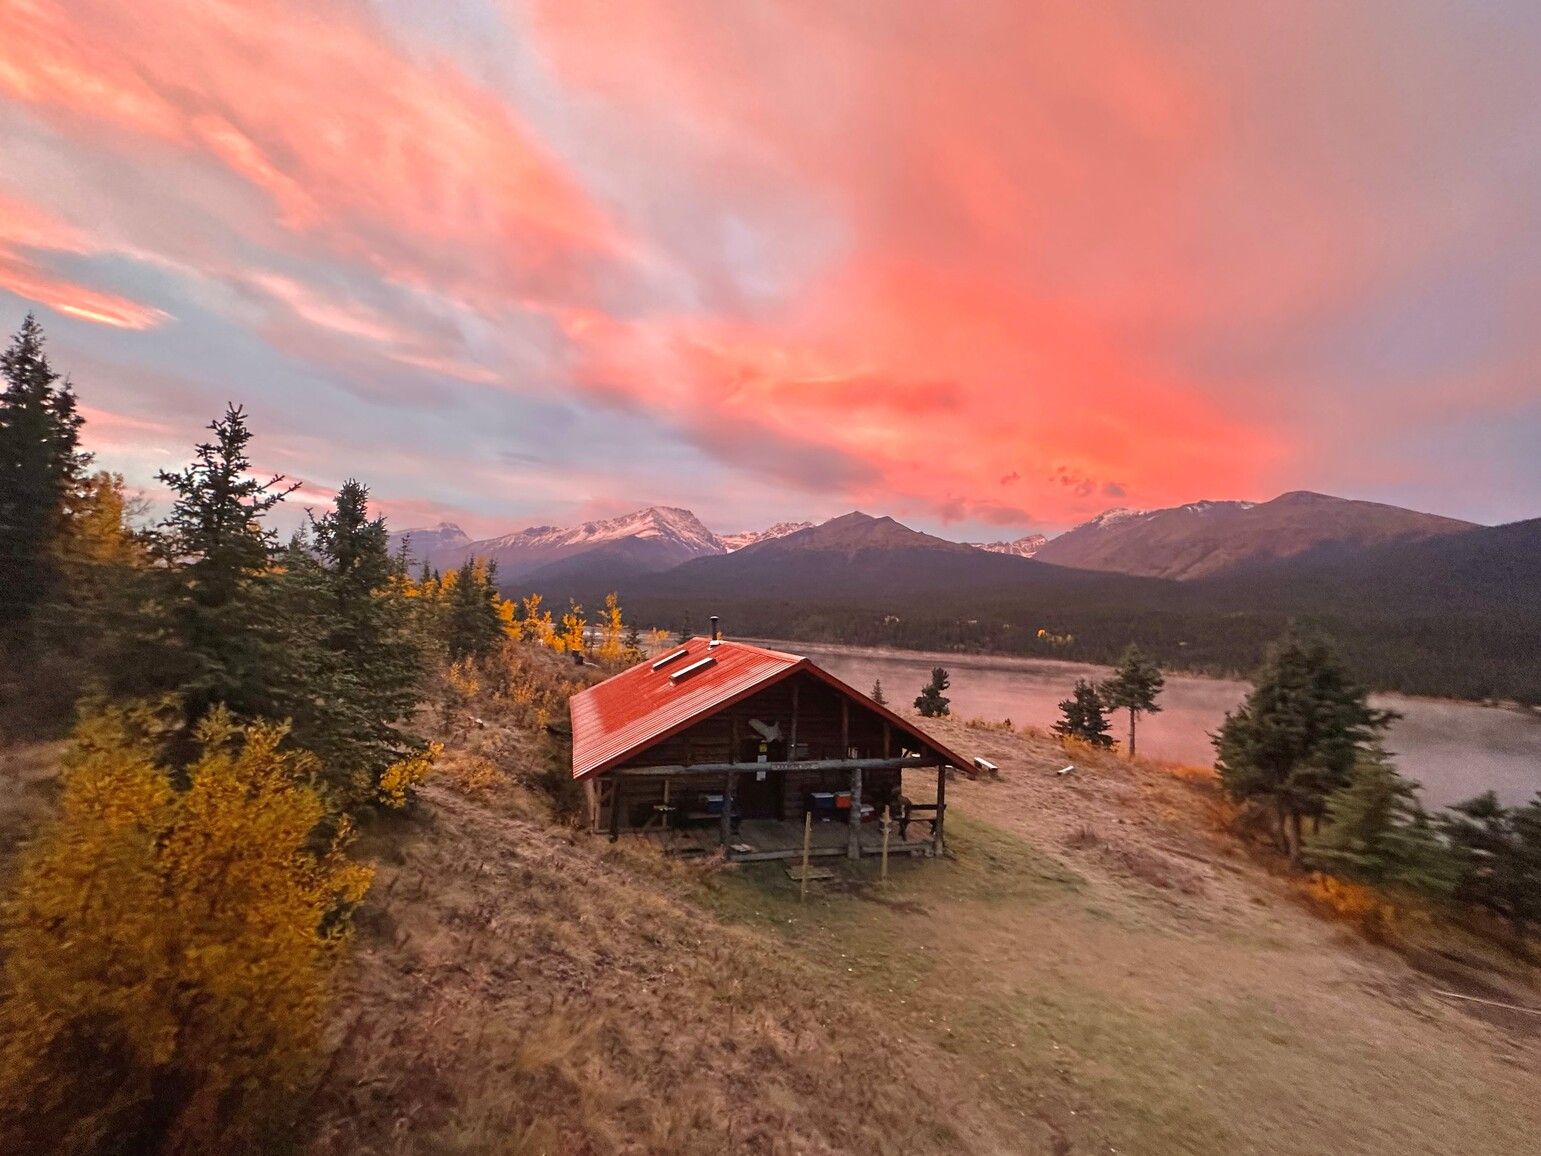 Autumn sunrise over the mountains in Spatsizi Plateau Wilderness Park. The cook house is located by Cold Fish Lake camp.